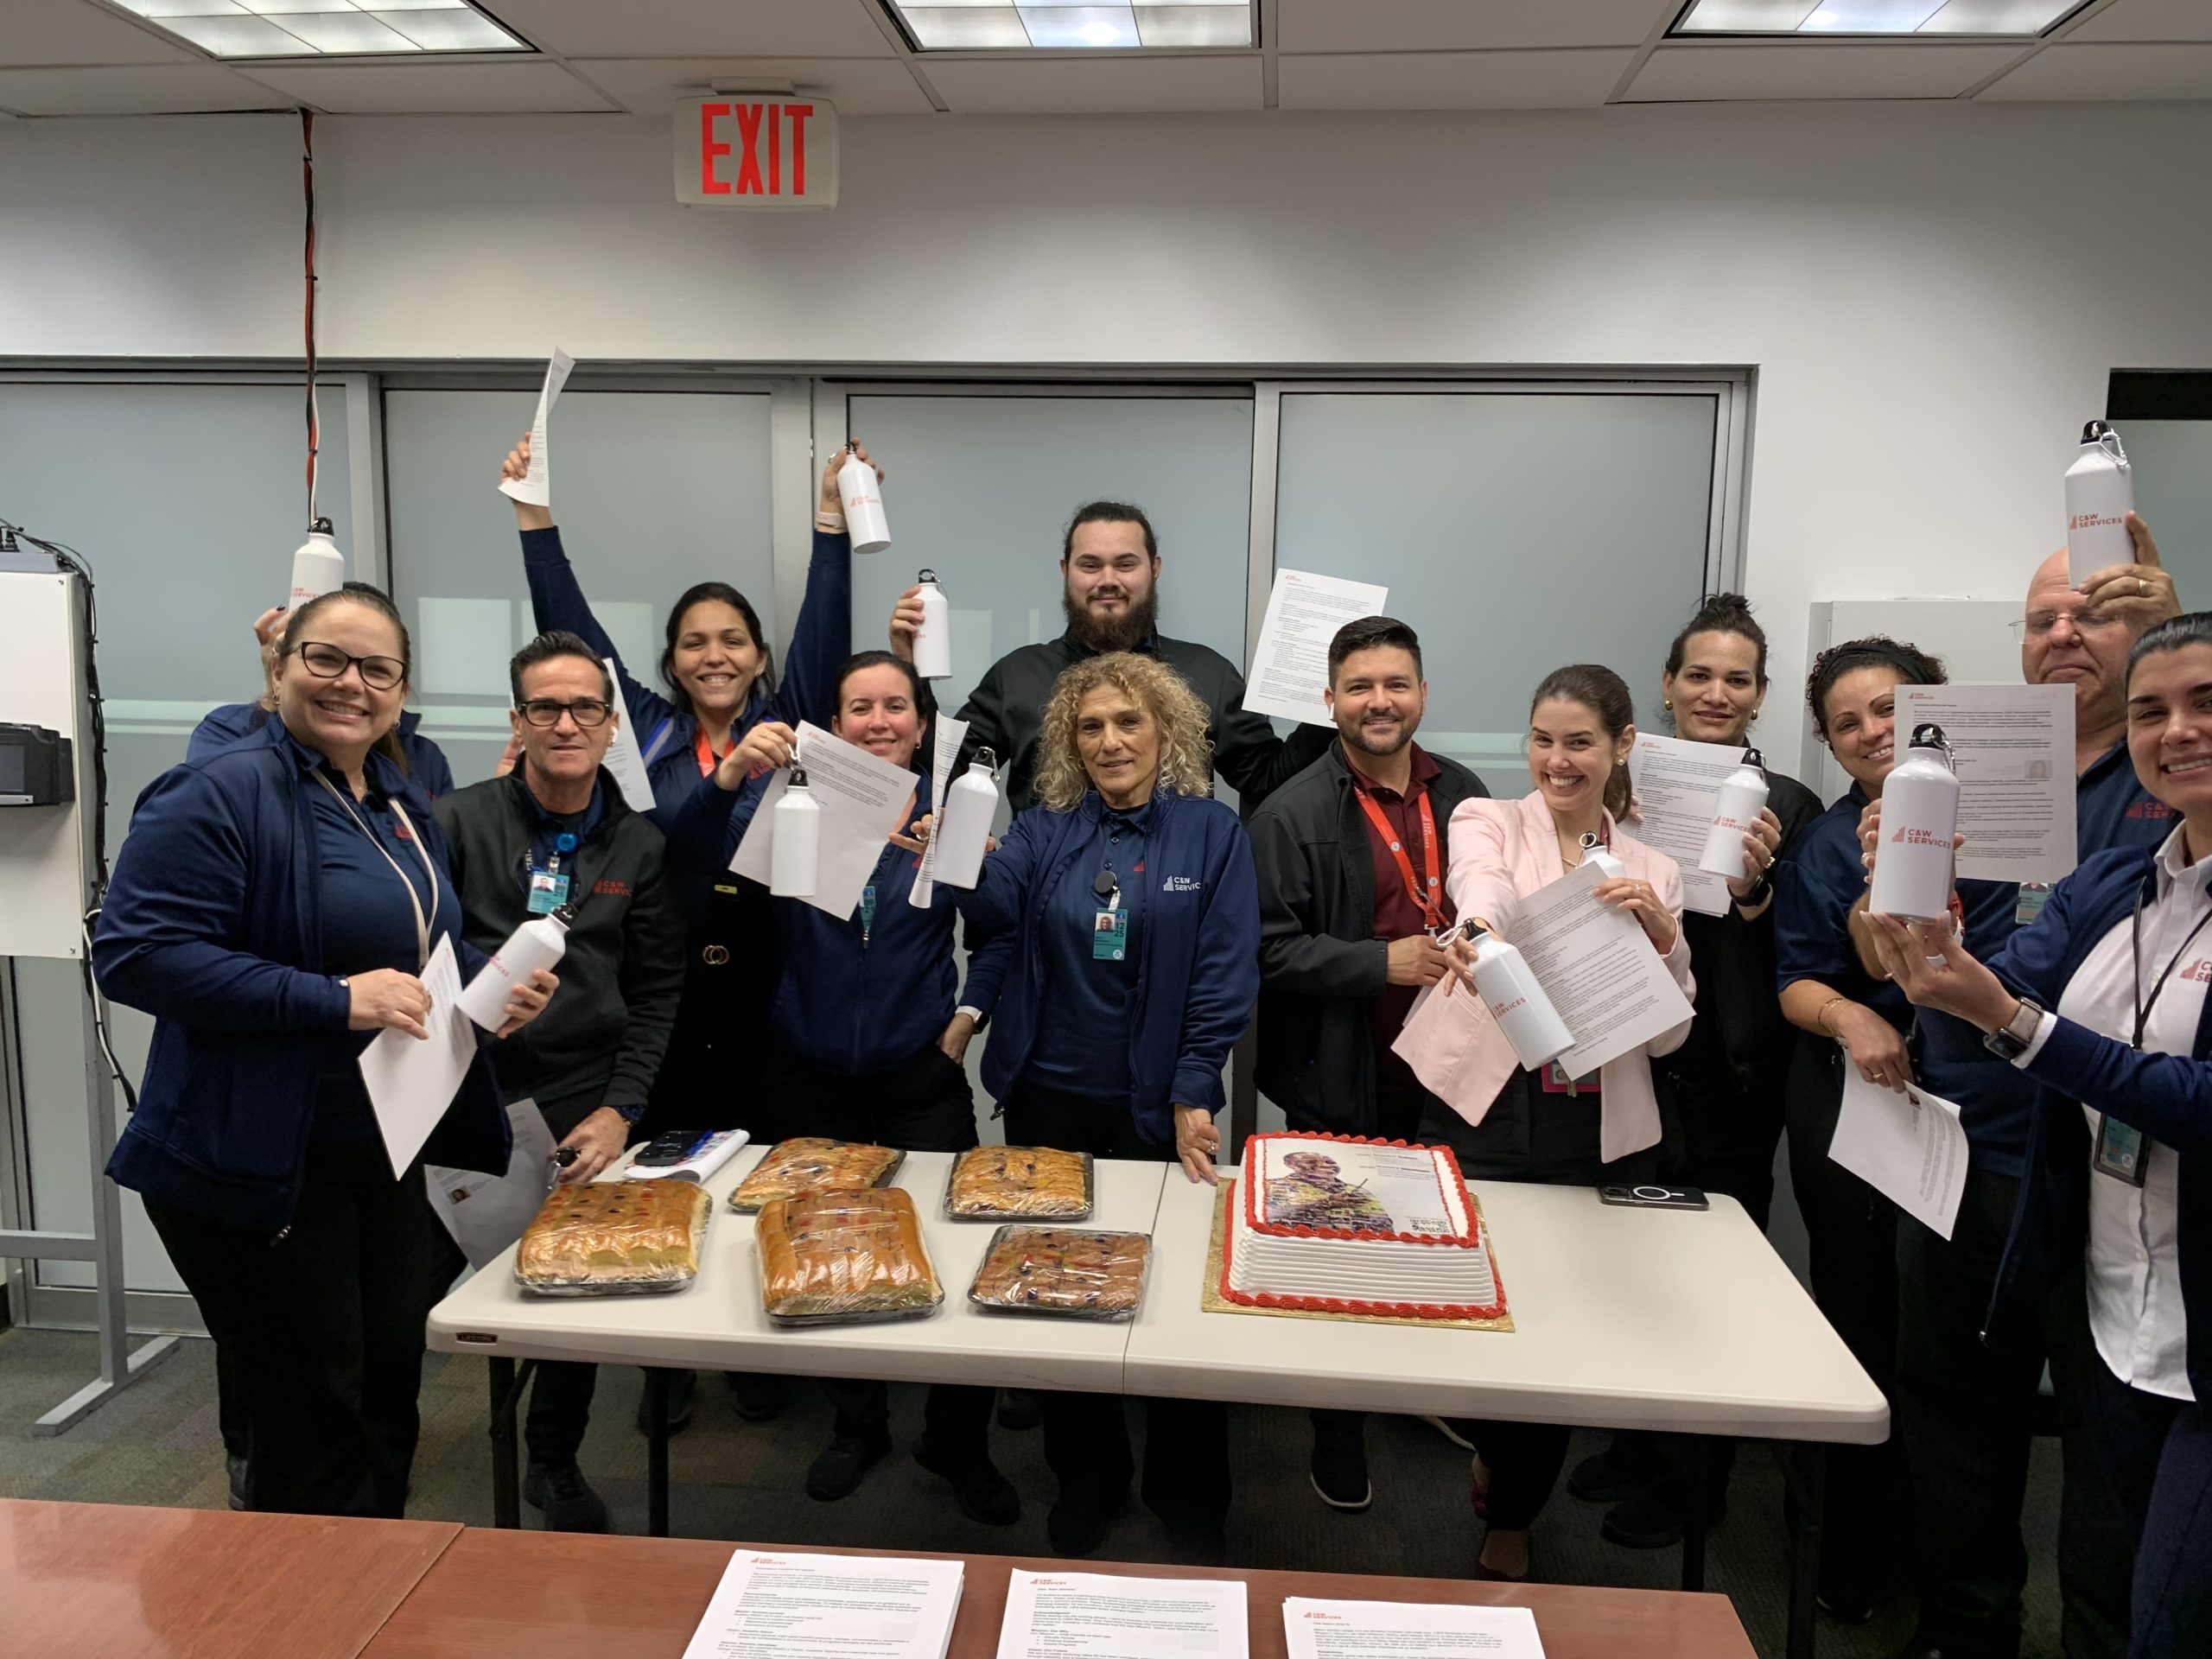 A group of employees celebrating with certificates and cakes in an office setting.